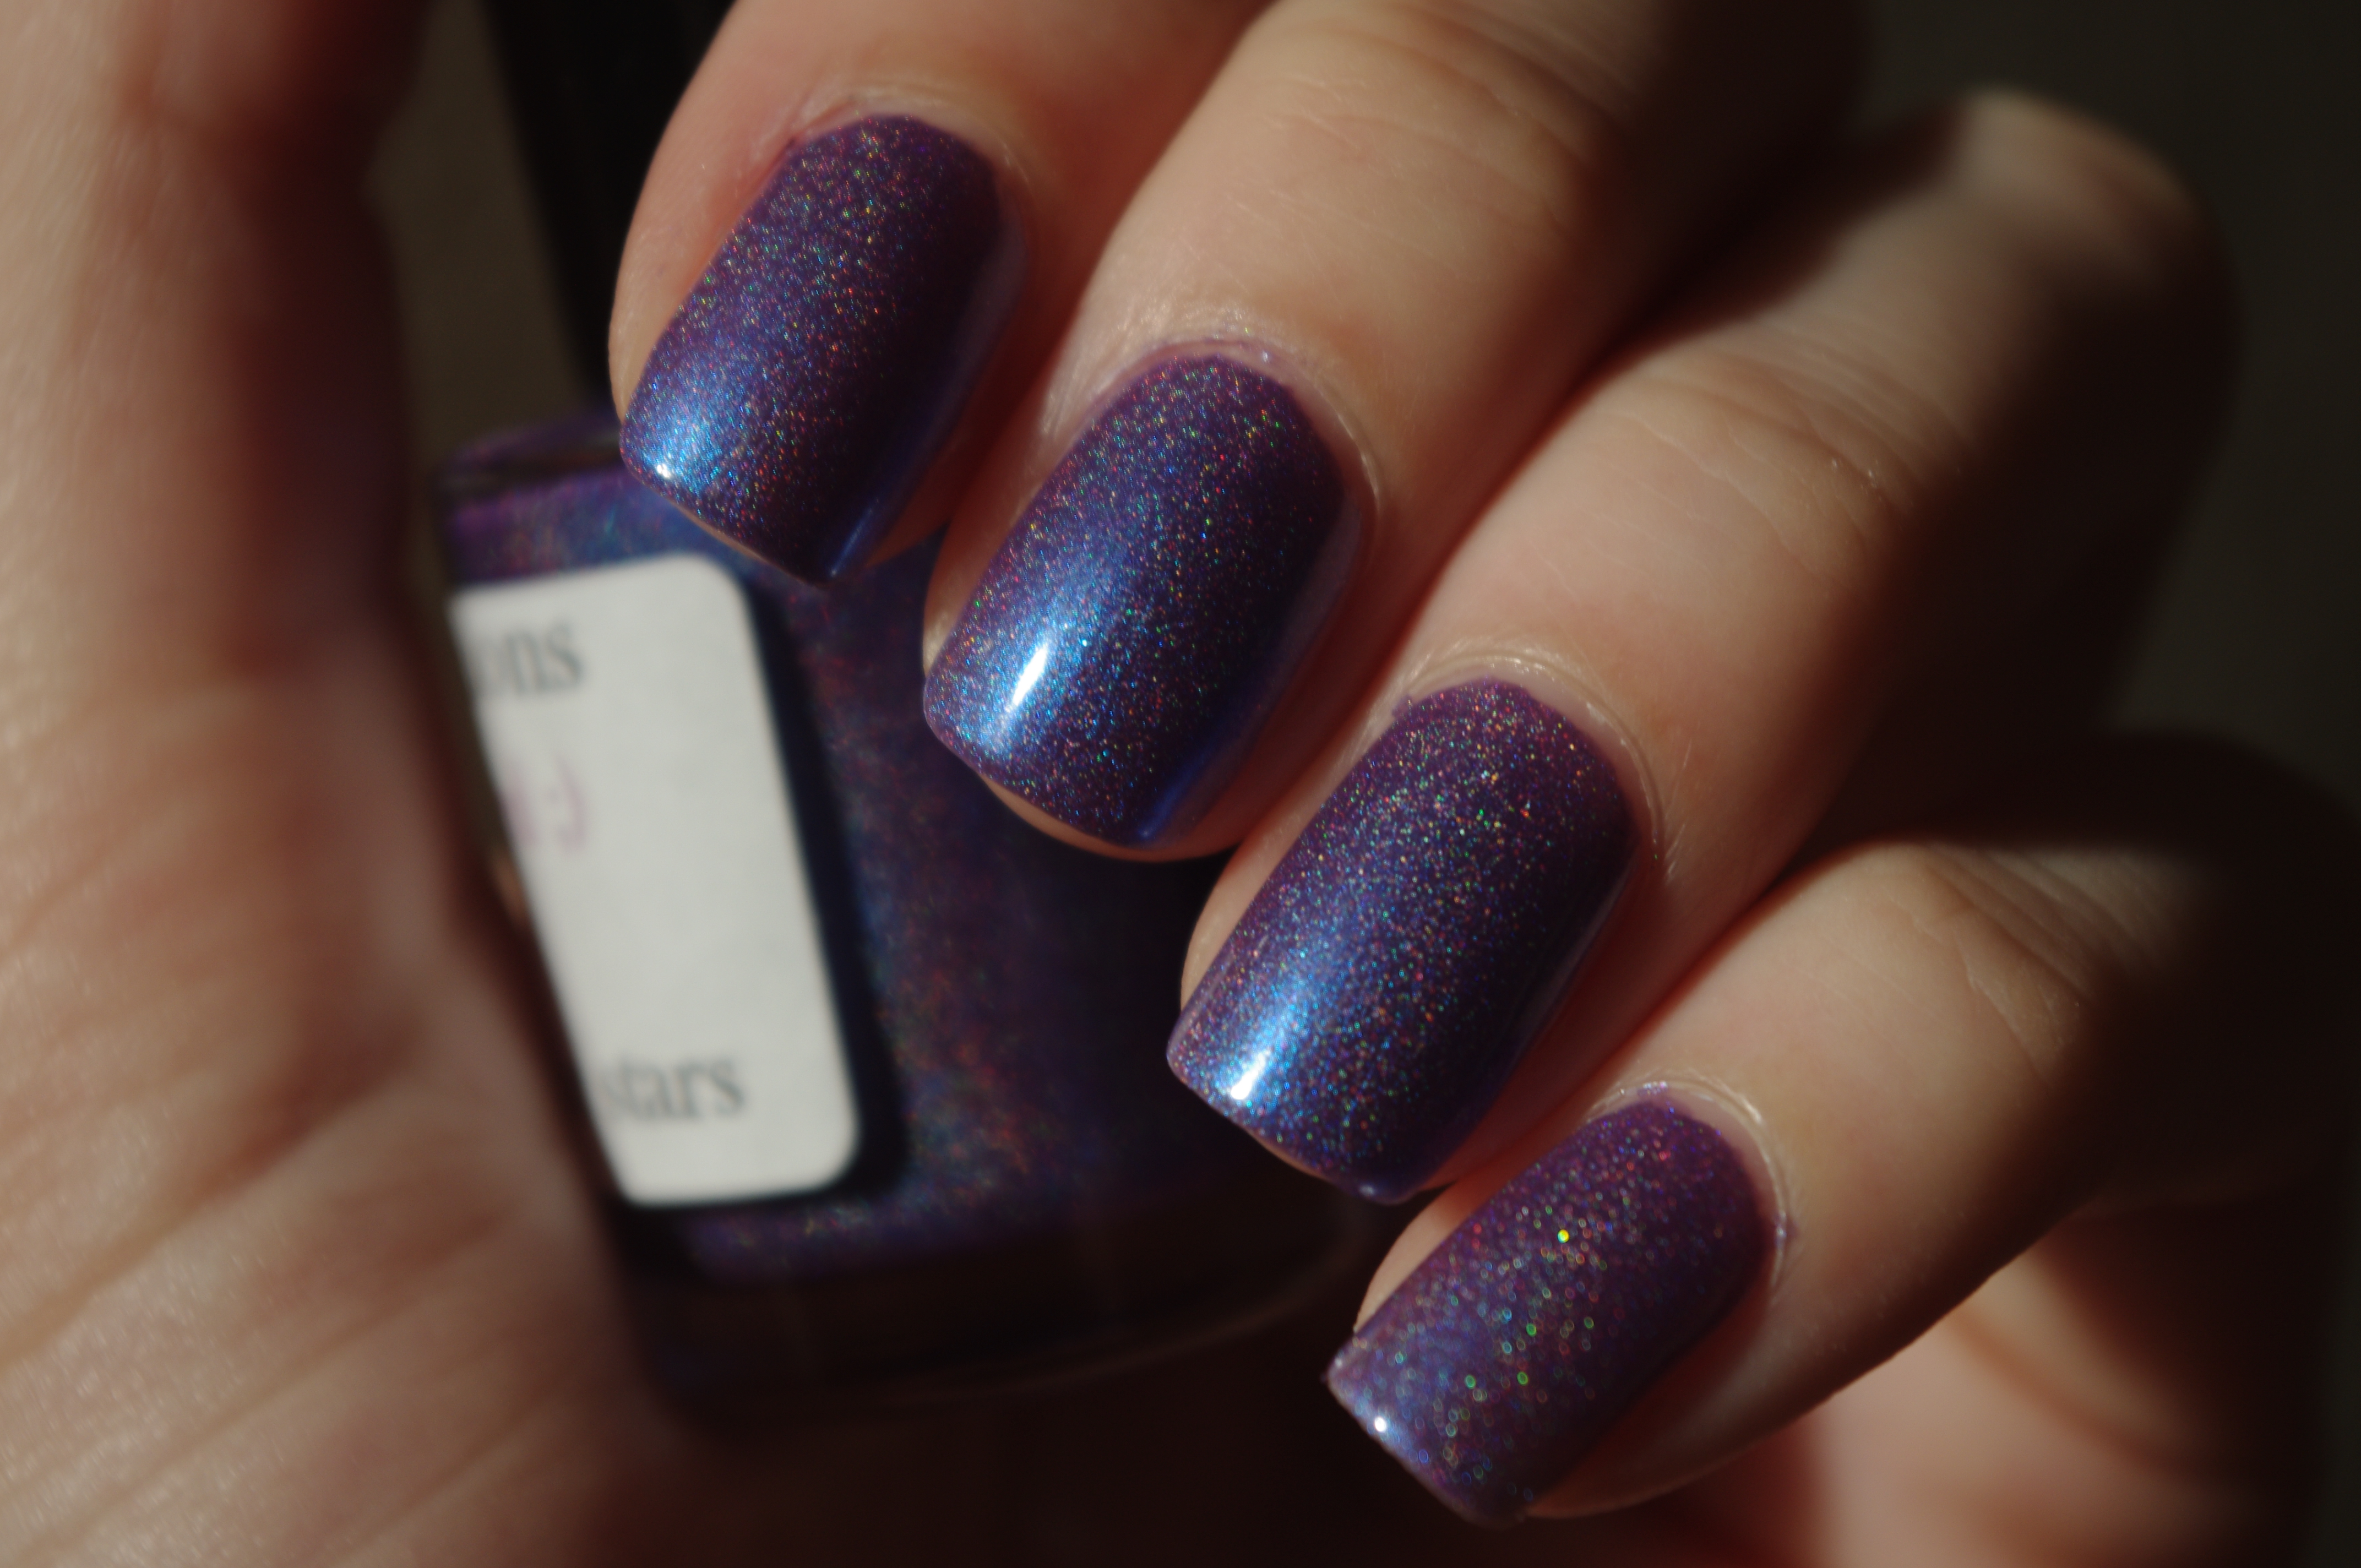 Taras-Talons-show-me-the-stars-swatches (6)